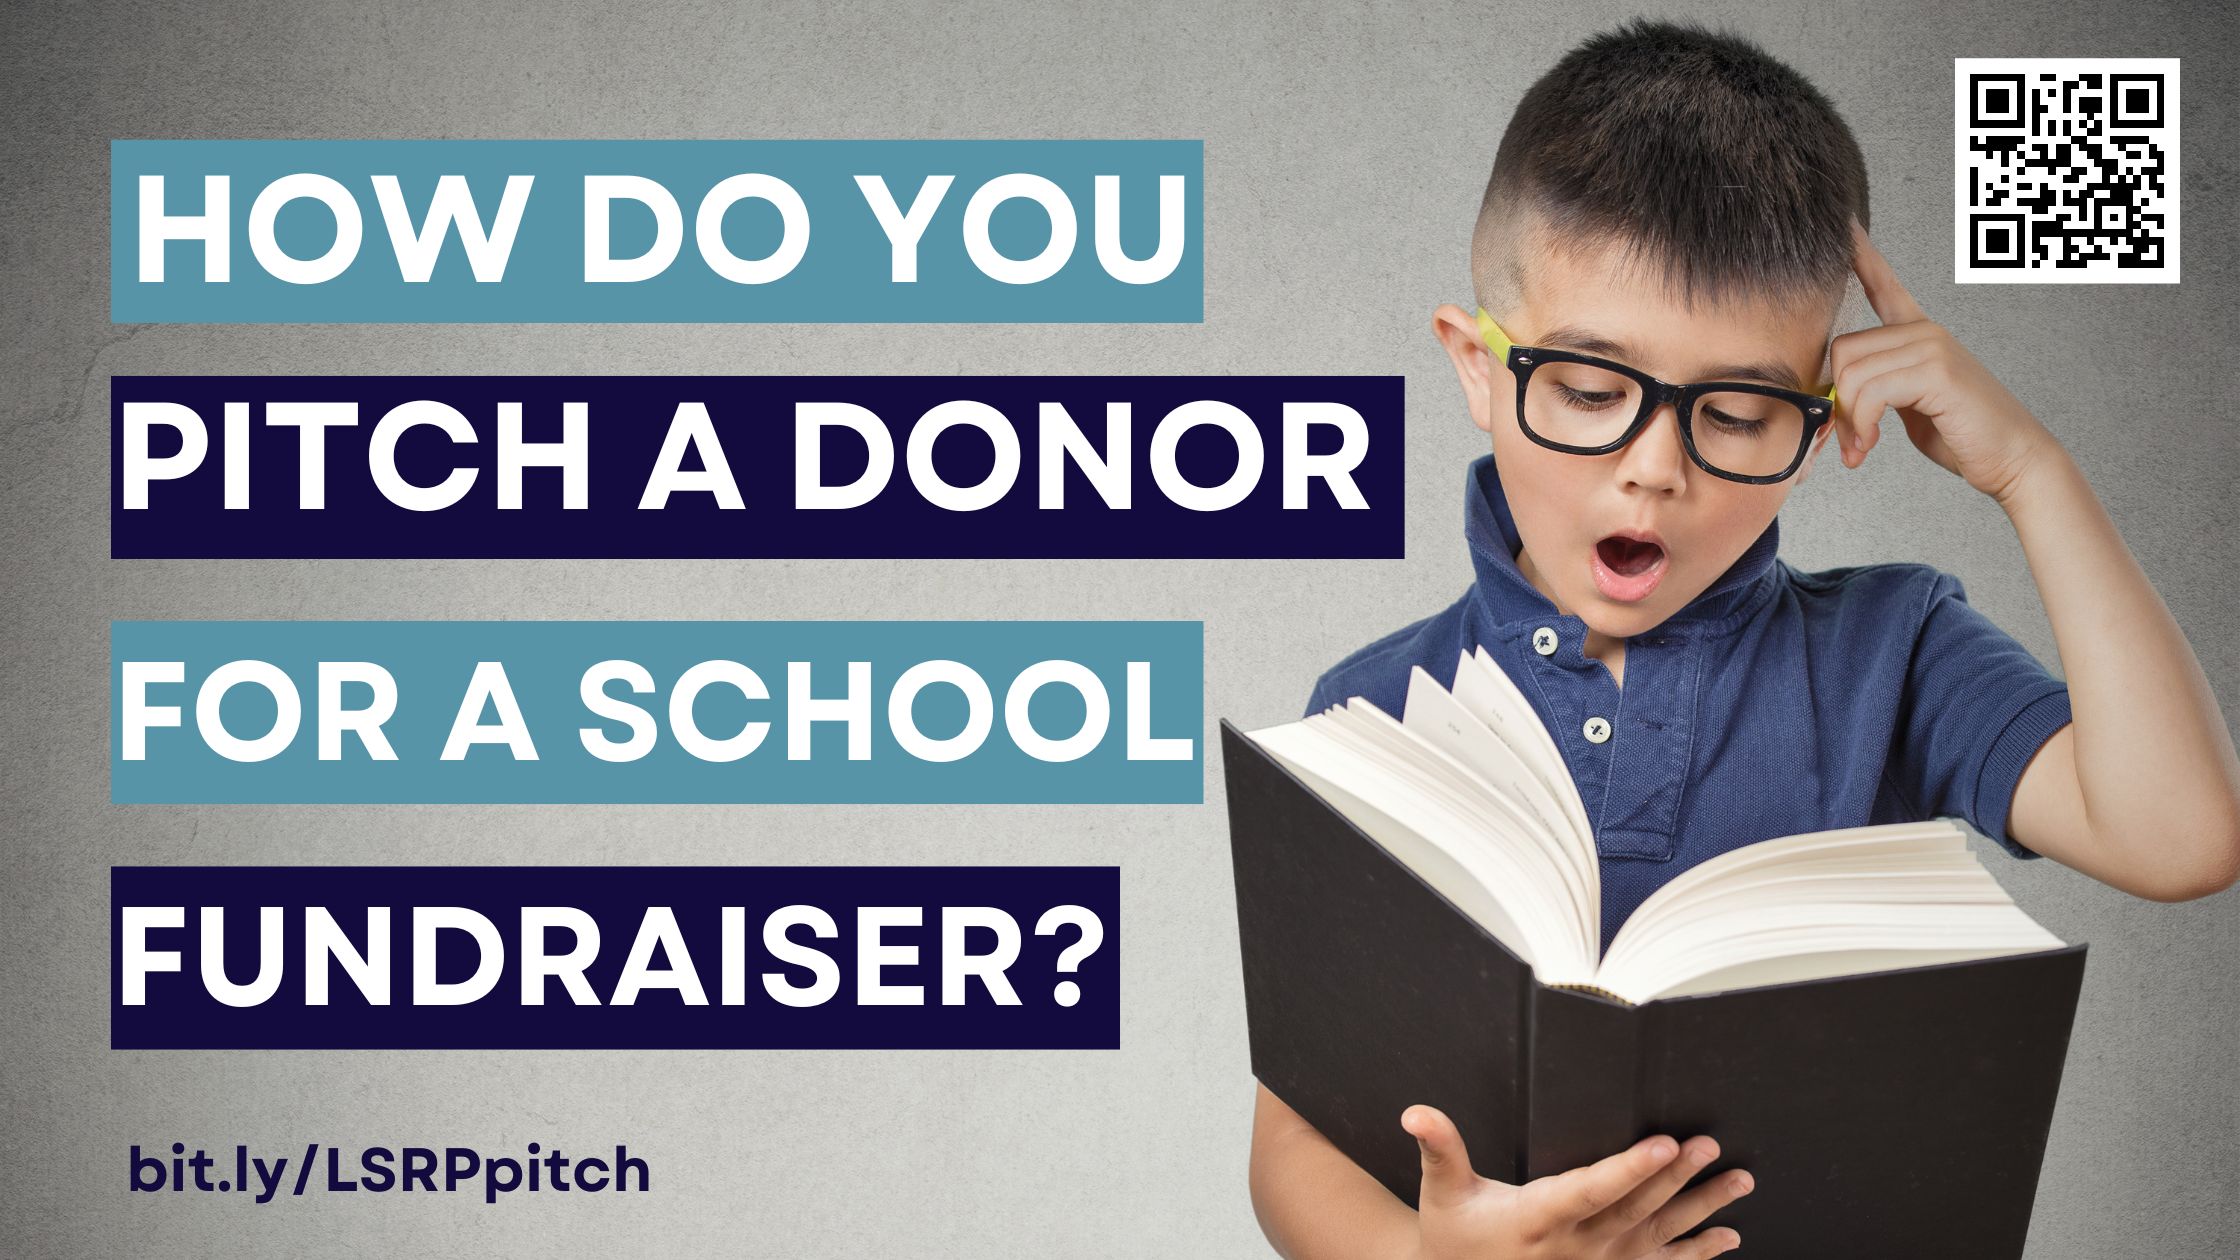 Pitch a Donor for a School Fundraiser